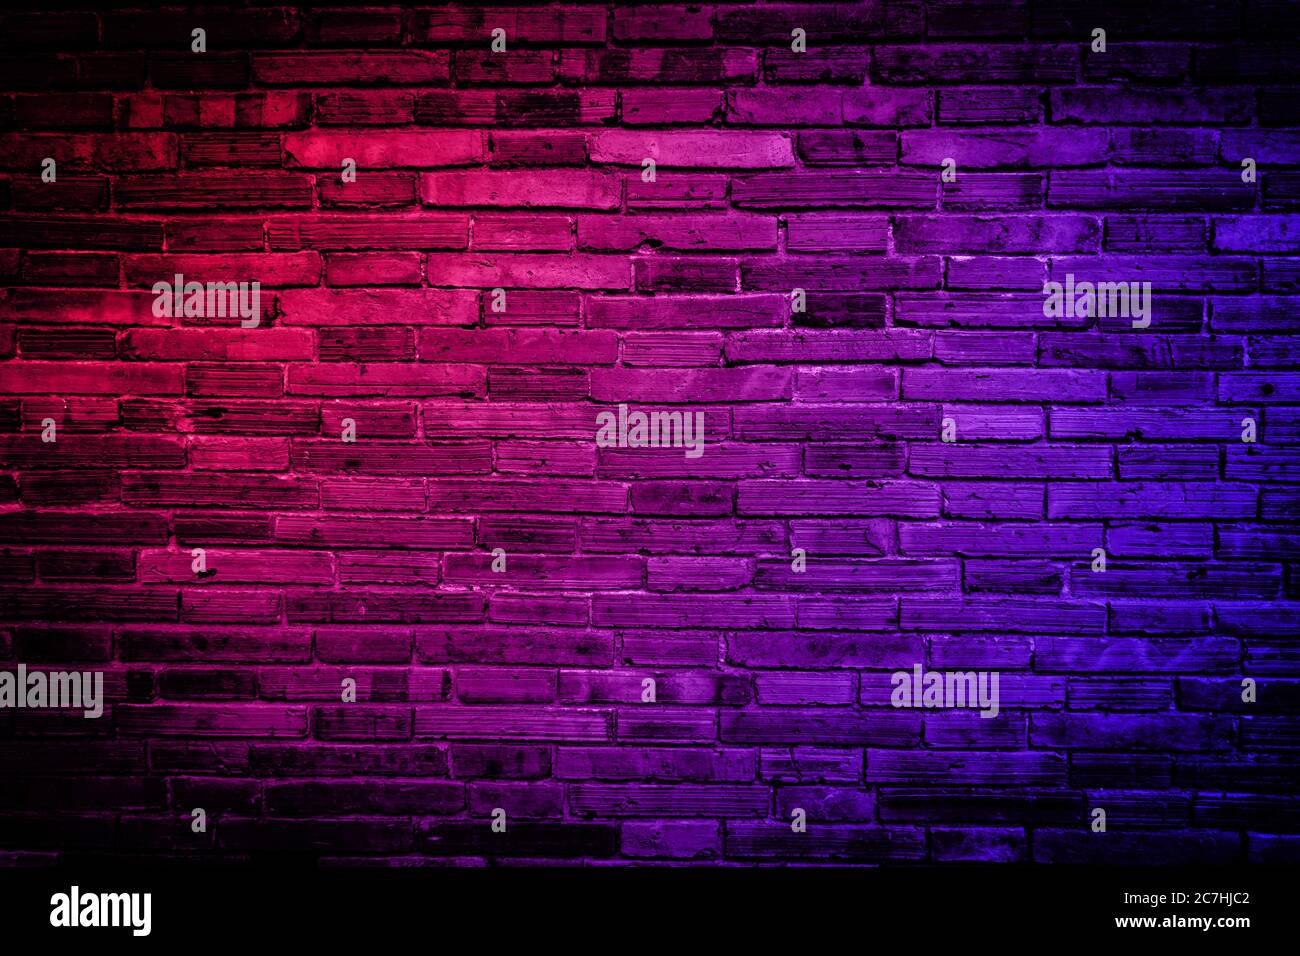 Neon light on brick walls that are not plastered background and texture.  Lighting effect red and blue neon background vertical of empty brick  basement Stock Photo - Alamy